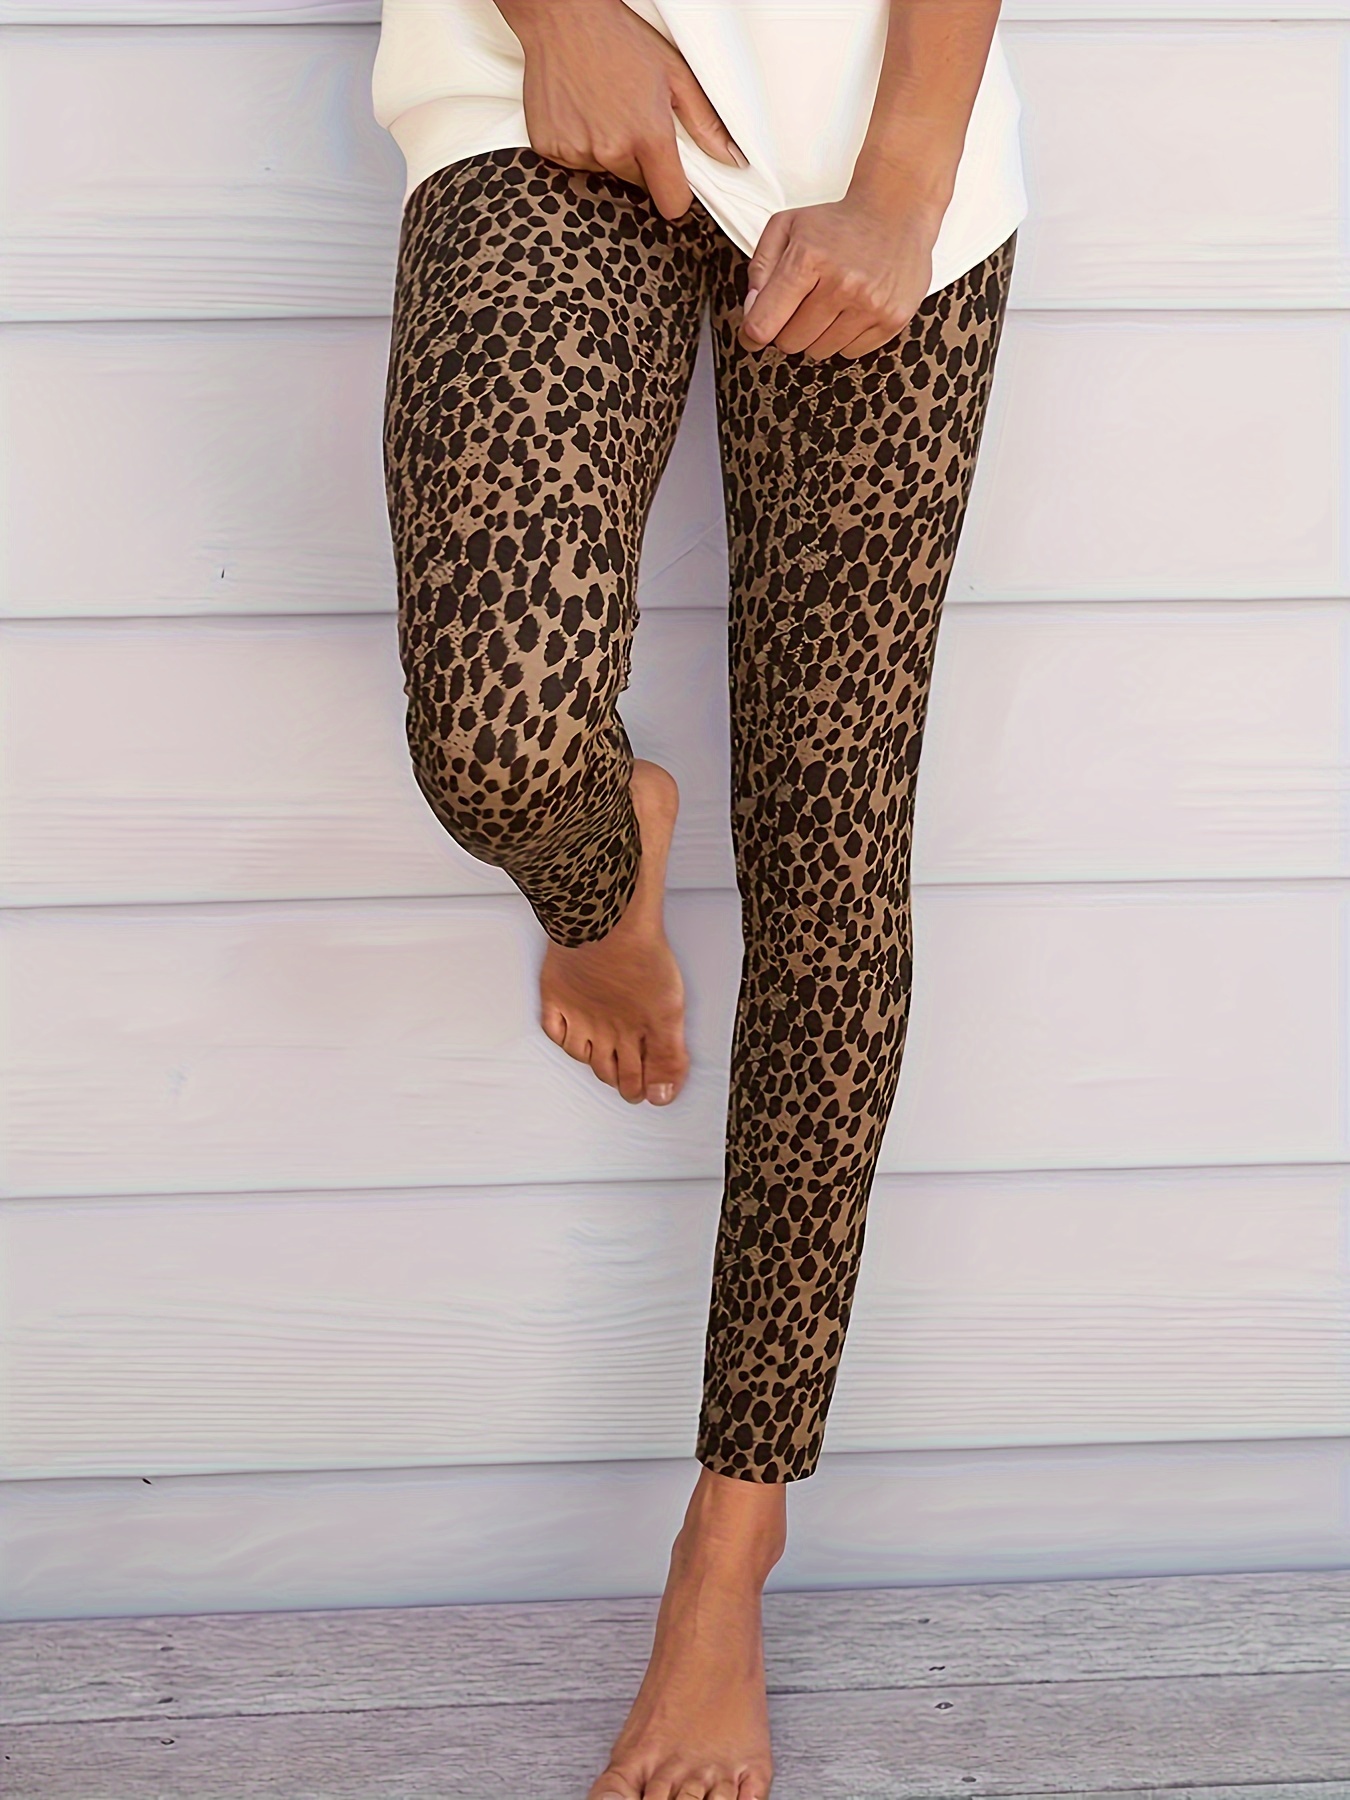 Tights for Women with Leopard Print, Leopard Tights, Fashion Thin  Stockings, Summer Comfortable Sheer Tights Seamless Stockings :  : Fashion